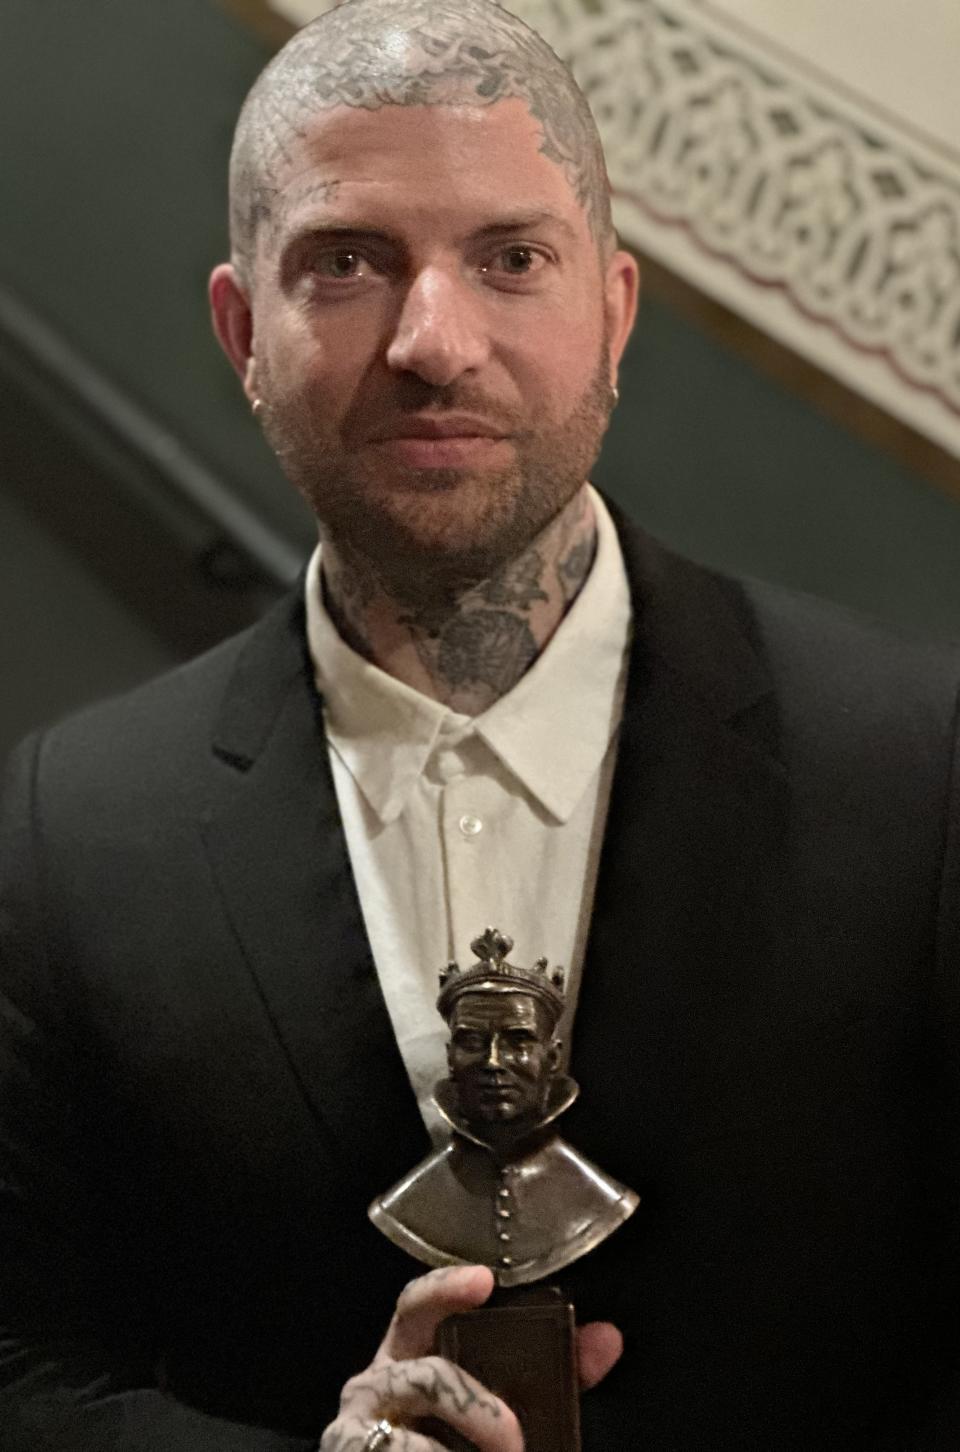 Jamie Lloyd with Olivier trophy for best director. Photo by Baz Bamigboye/Deadline.